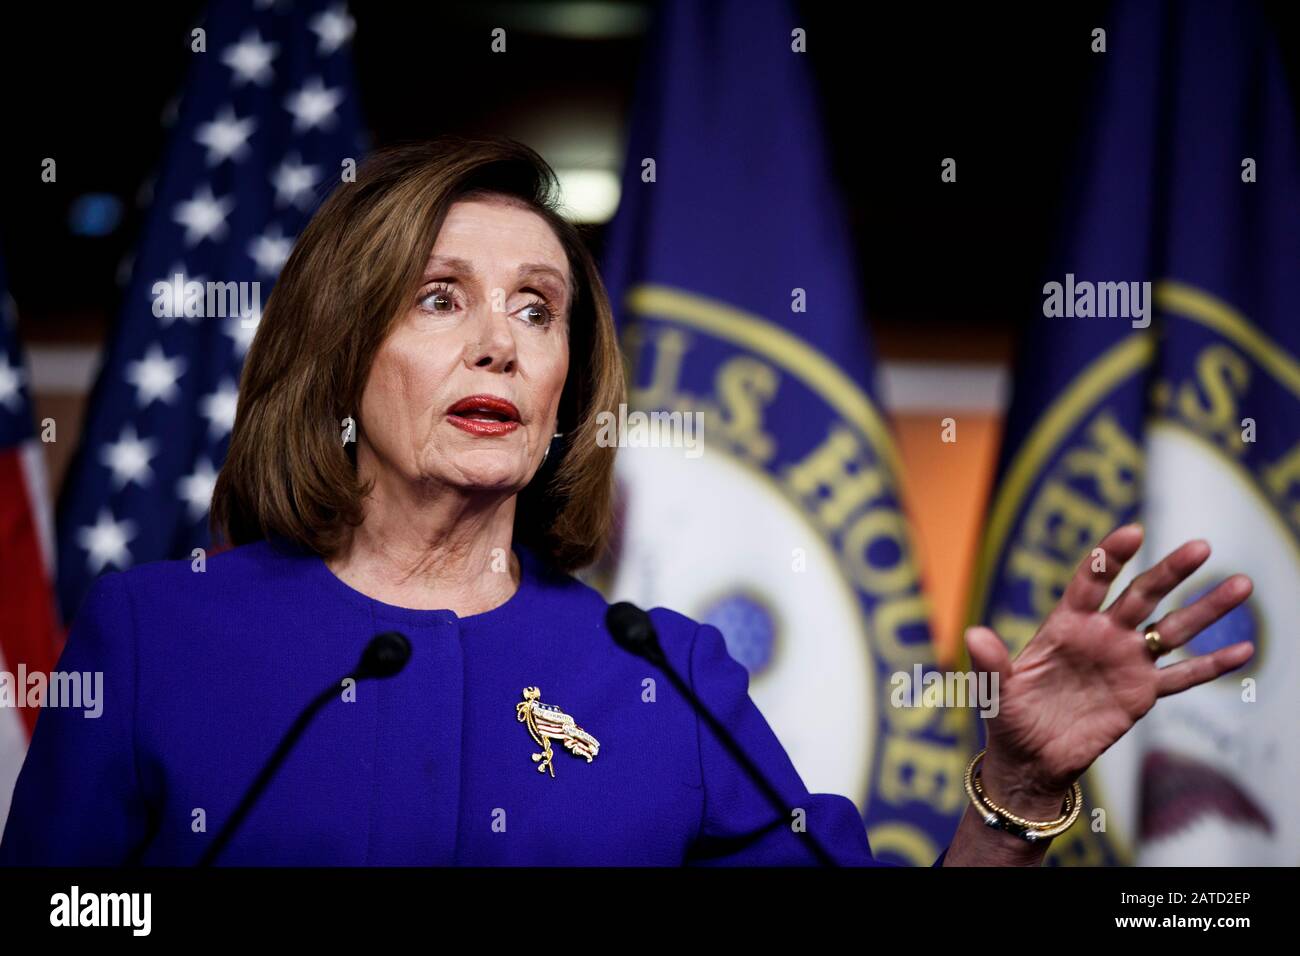 Beijing, China. 9th Jan, 2020. U.S. House Speaker Nancy Pelosi speaks during a press conference on the Capitol Hill in Washington, DC Jan. 9, 2020. Credit: Ting Shen/Xinhua/Alamy Live News Stock Photo